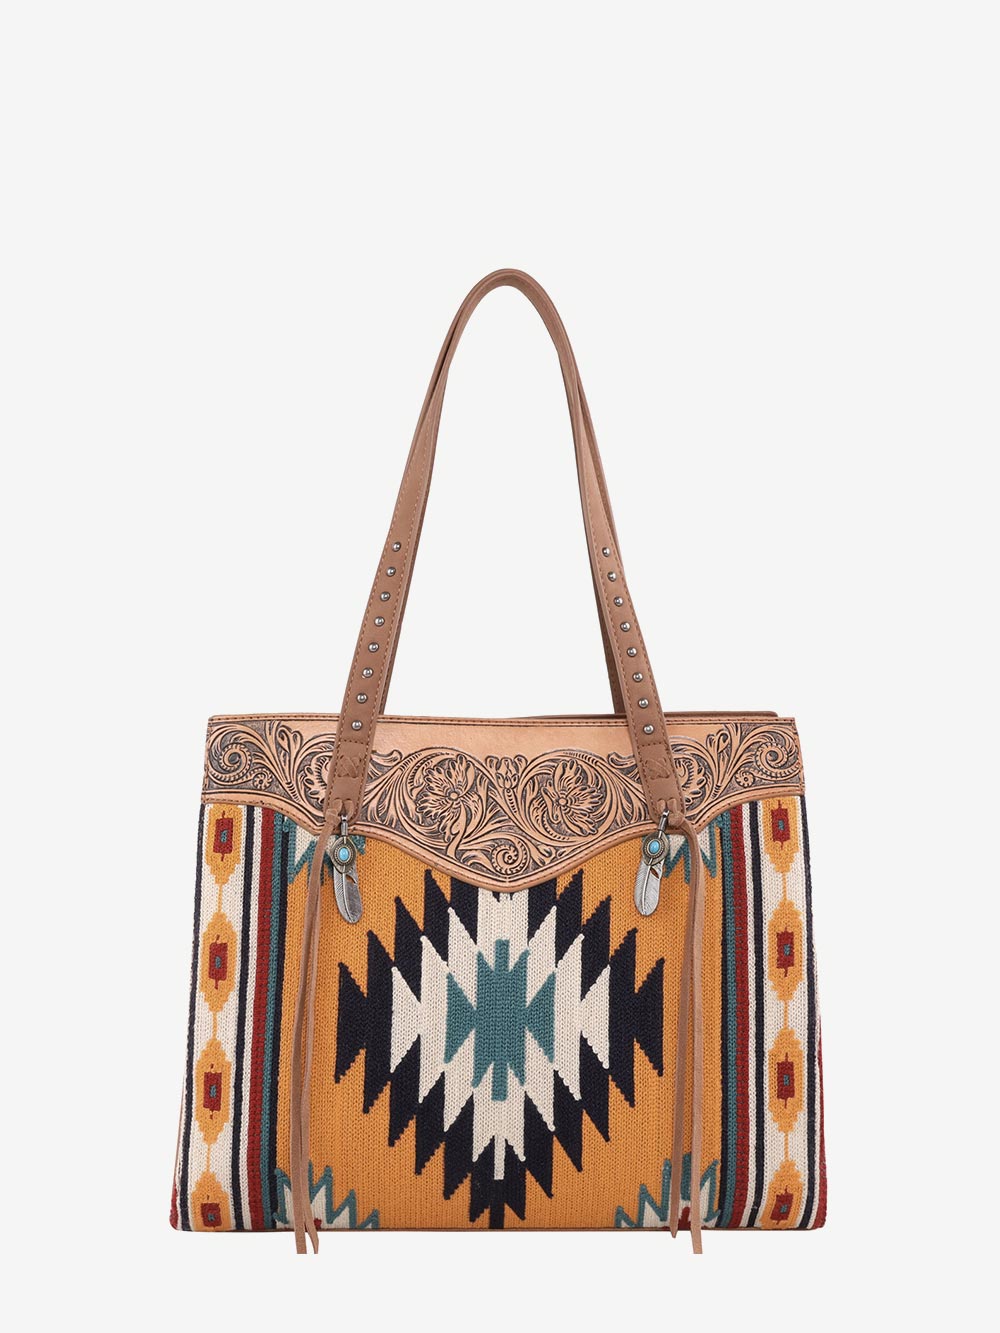 Trinity Ranch Aztec Tapestry Concealed Carry Tote - Montana West World